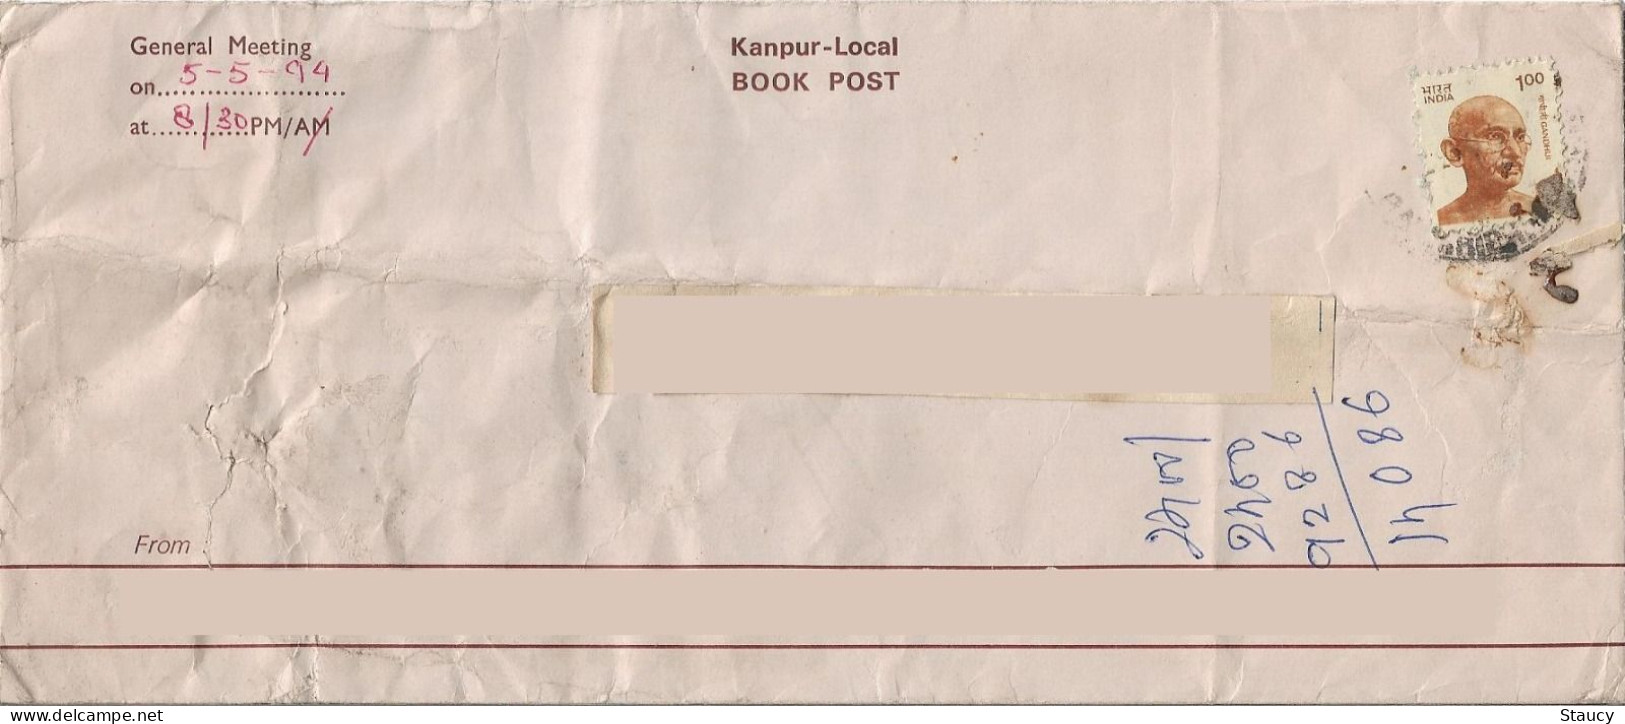 India 1994 MAHATMA GANDHI Rs.1.00 STAMP FRANKED ON COVER POSTAL Used As Per Scan - Storia Postale